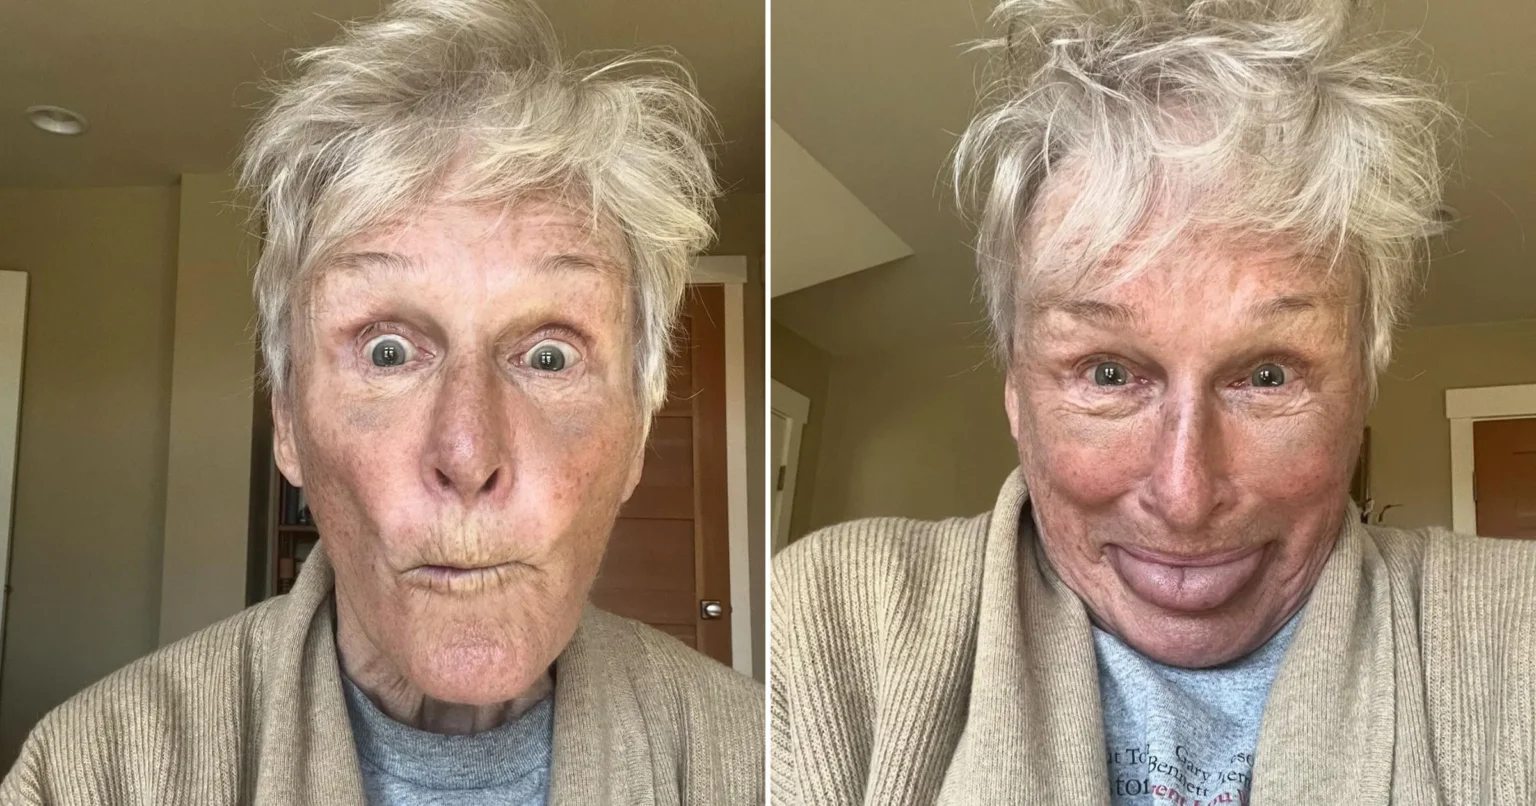 Hollywood legend, 76, shocks fans with bruised face in new selfie: ‘Feeling as beautiful as ever’